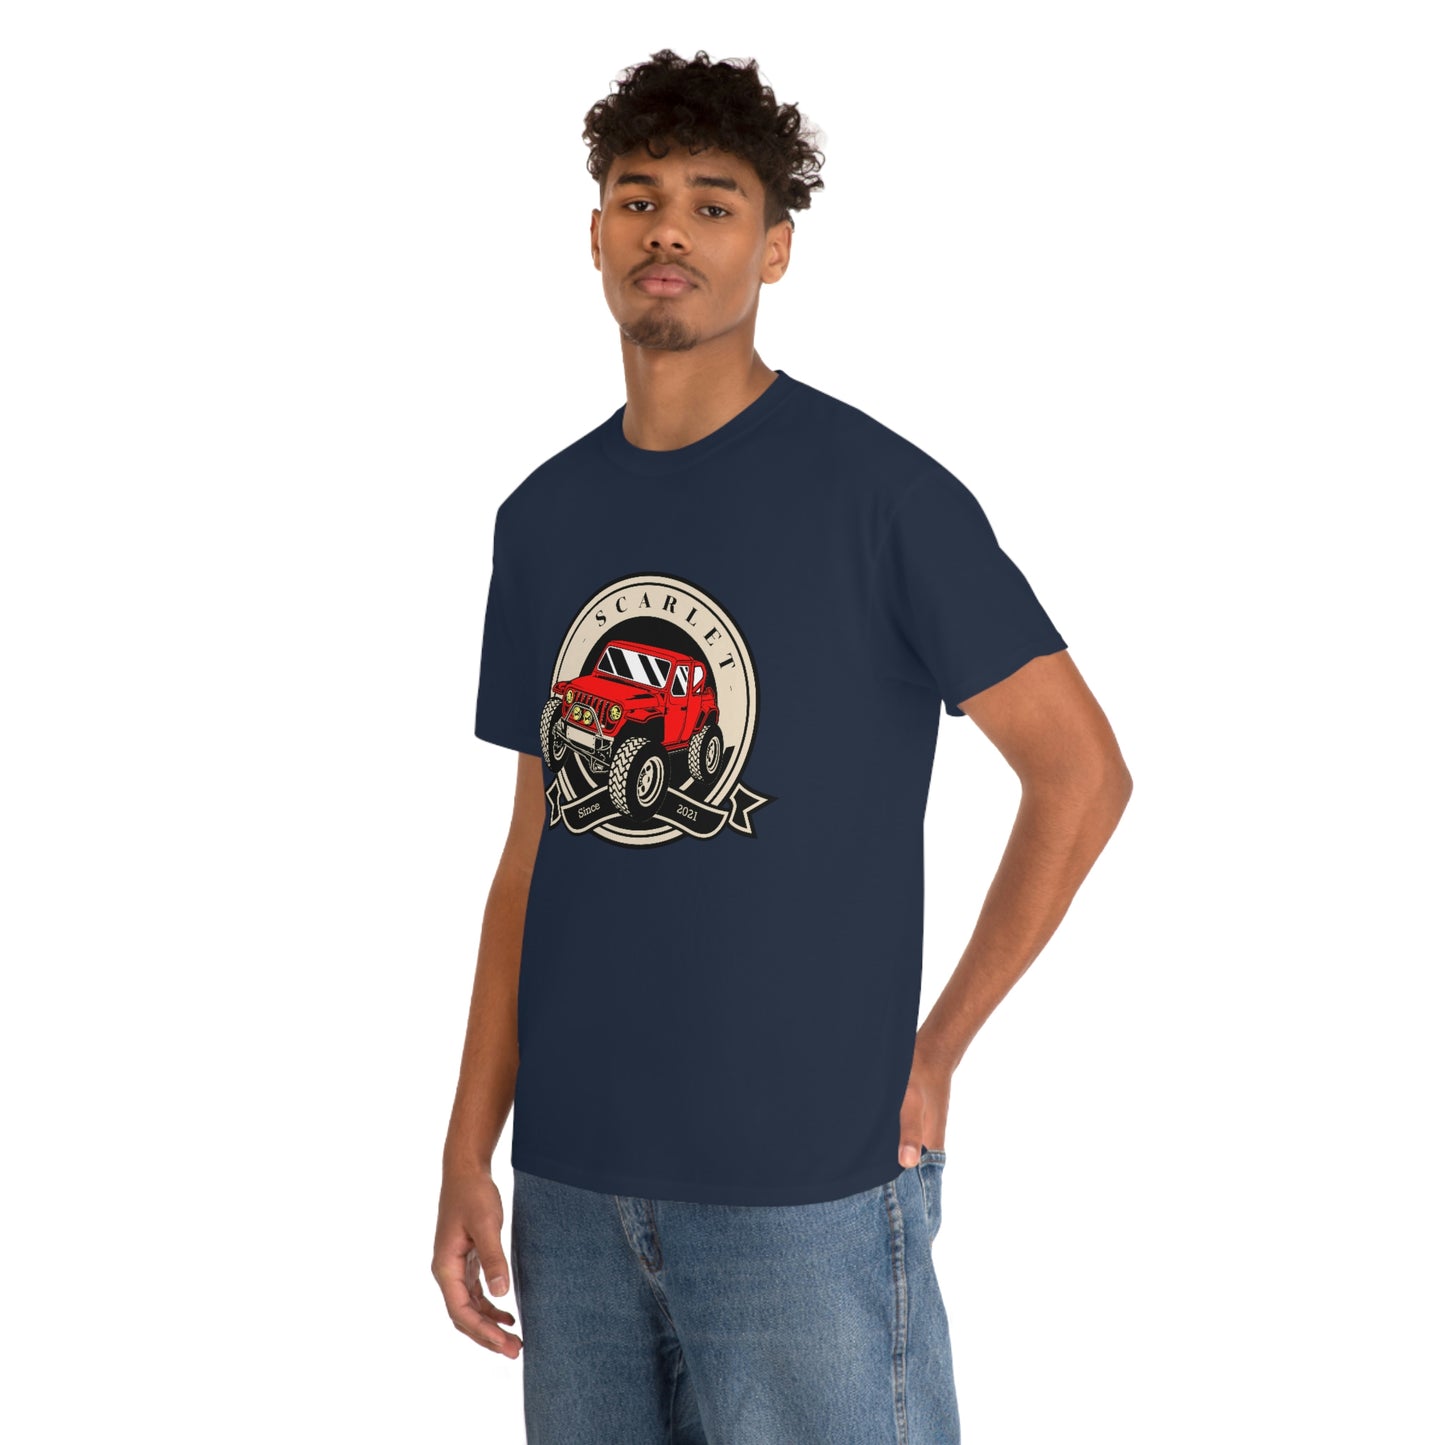 Scarlet the Jeep T-shirt